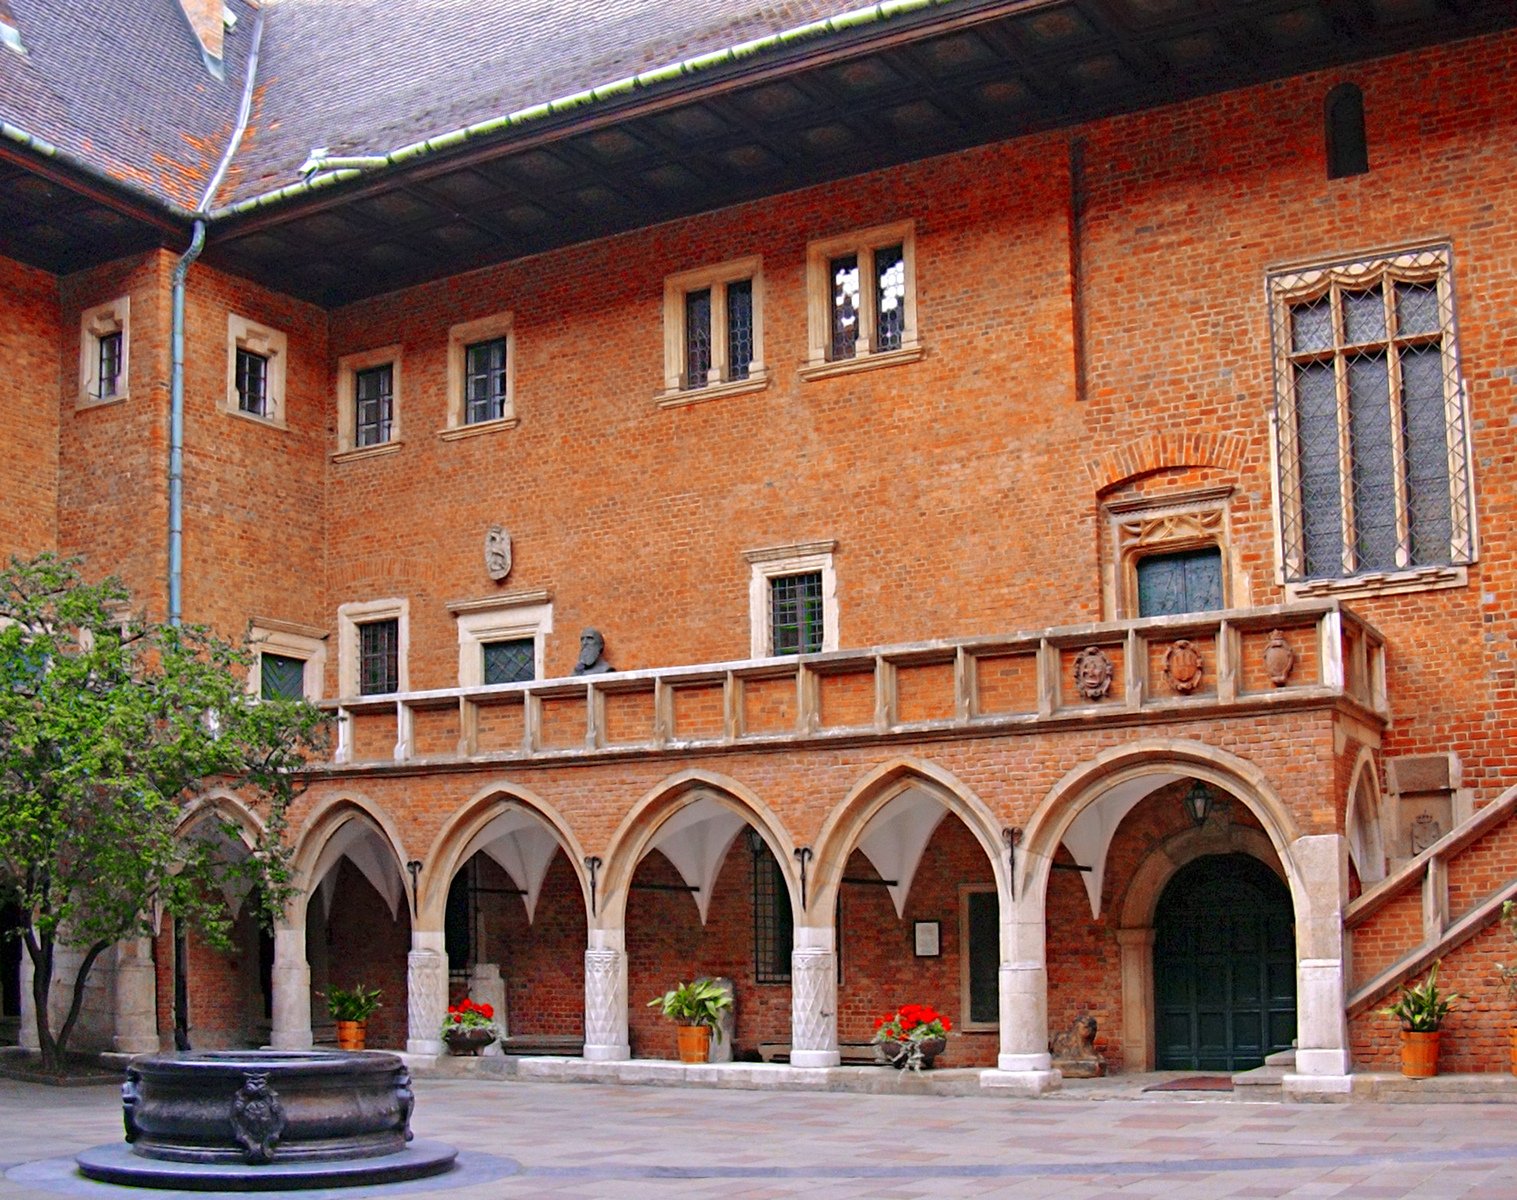 an ornate courtyard in the historic building with arches